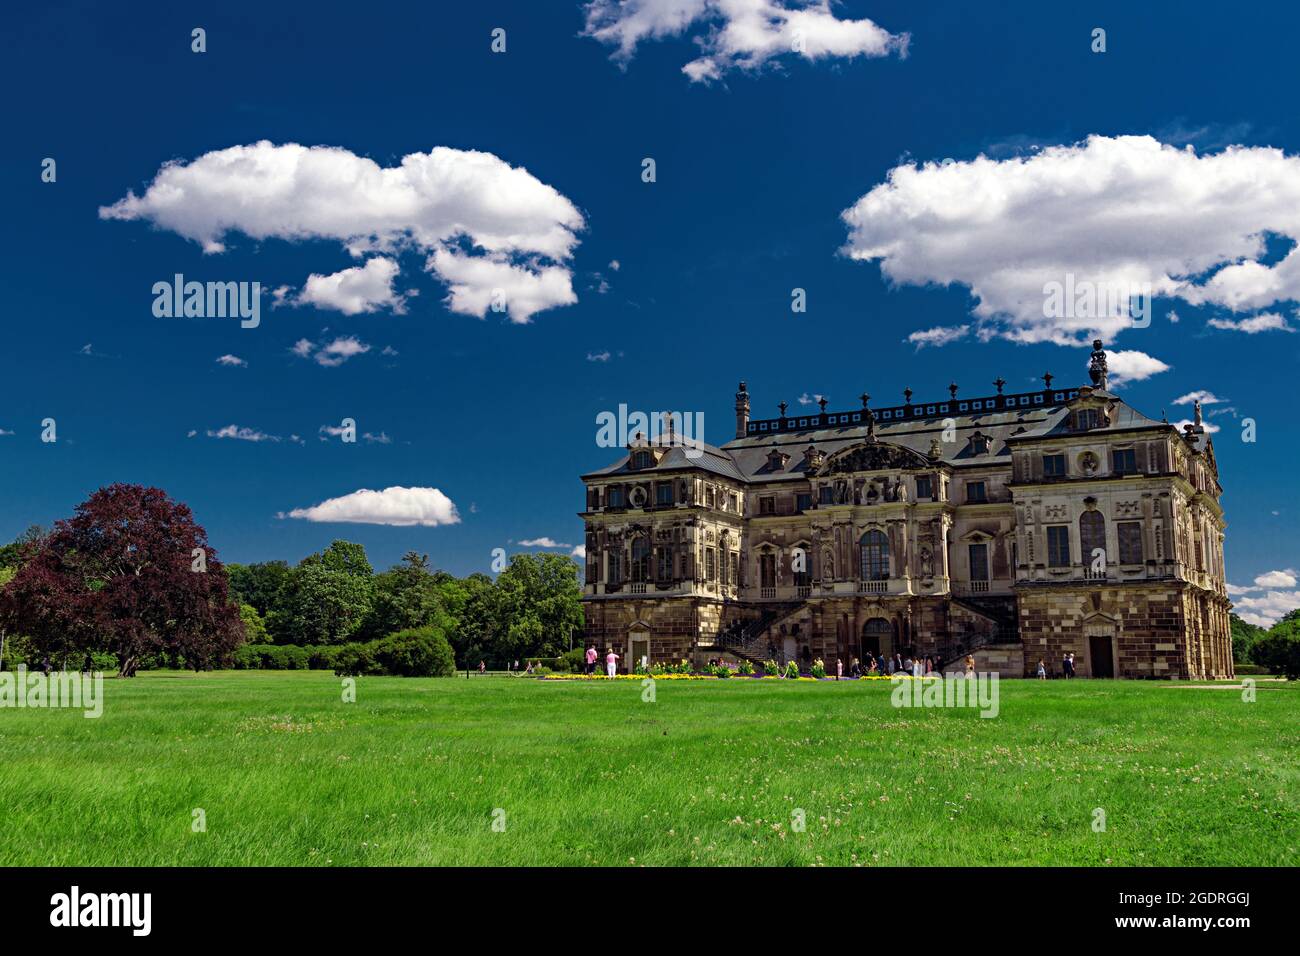 The Grand Garden Palace, Dresden, Germany Stock Photo